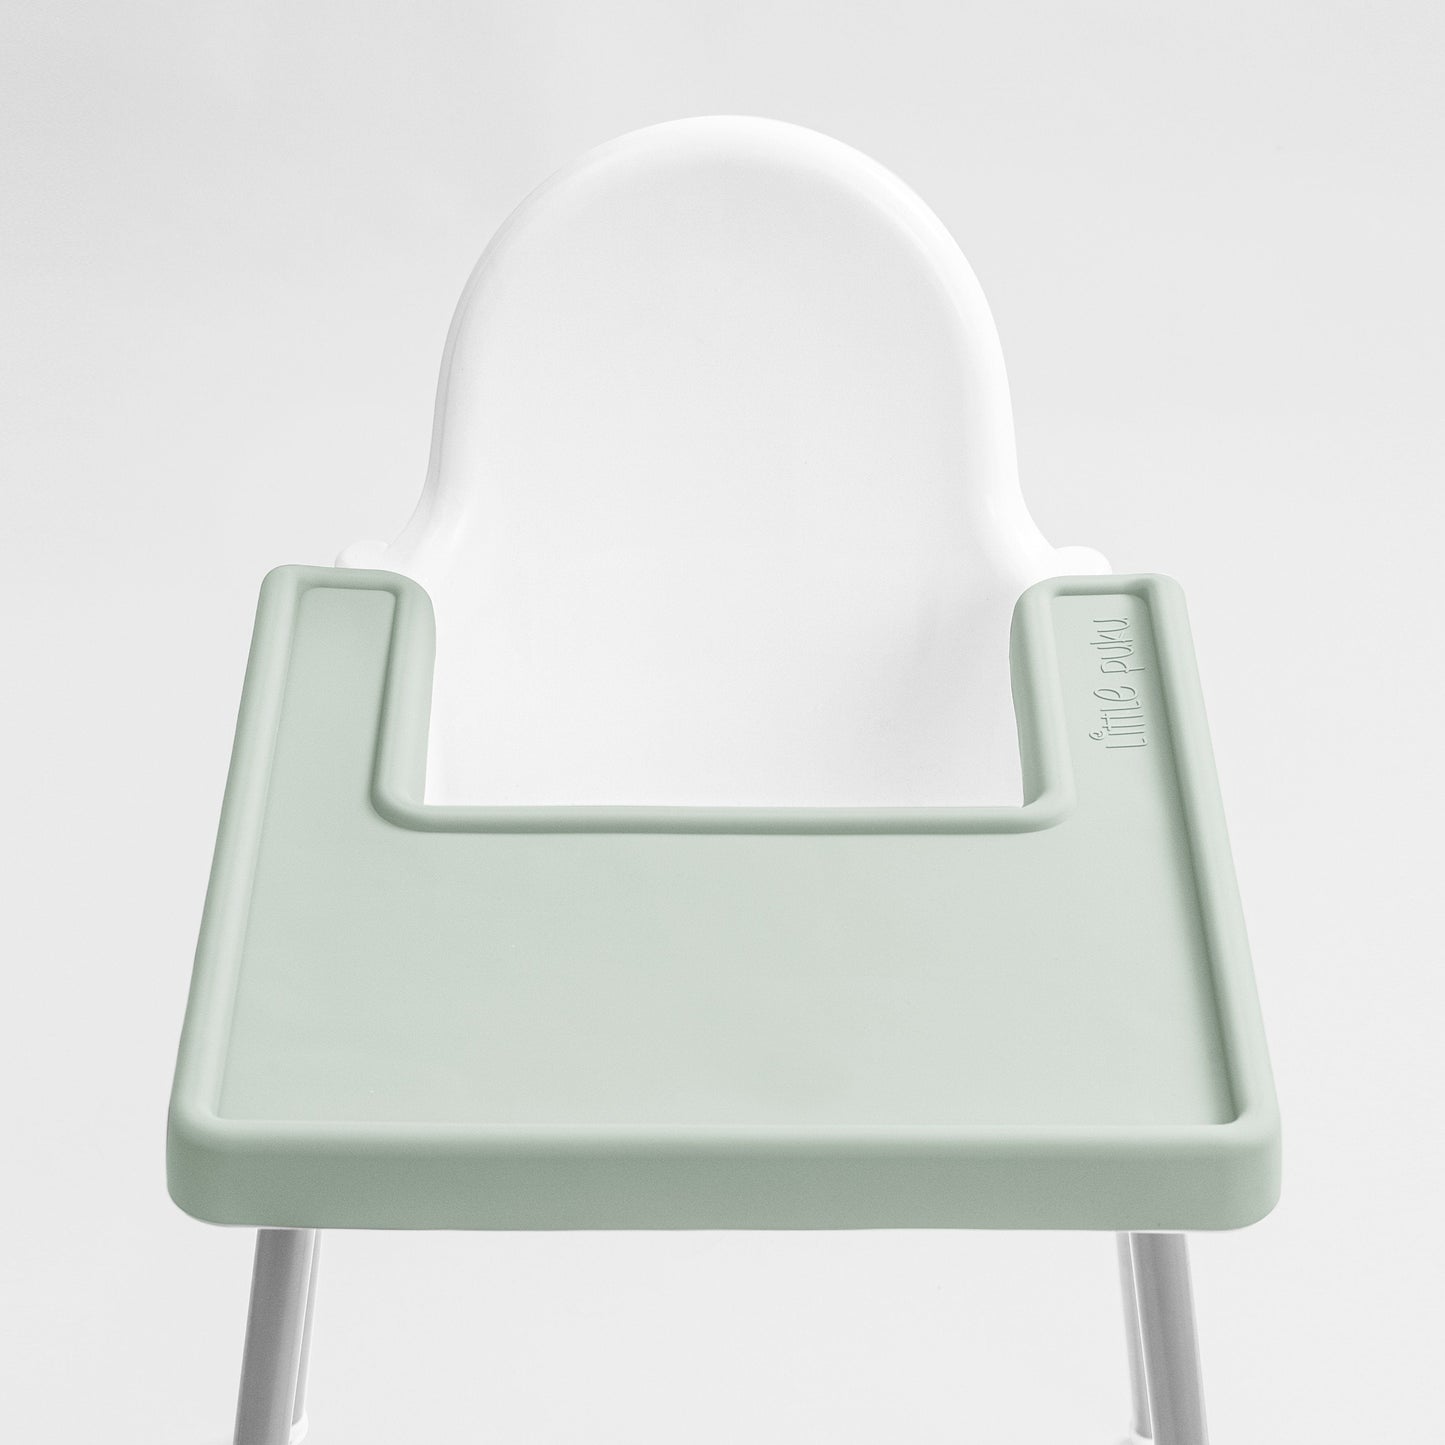 Load image into Gallery viewer, Silt Green IKEA Highchair Placemat - Little Puku
